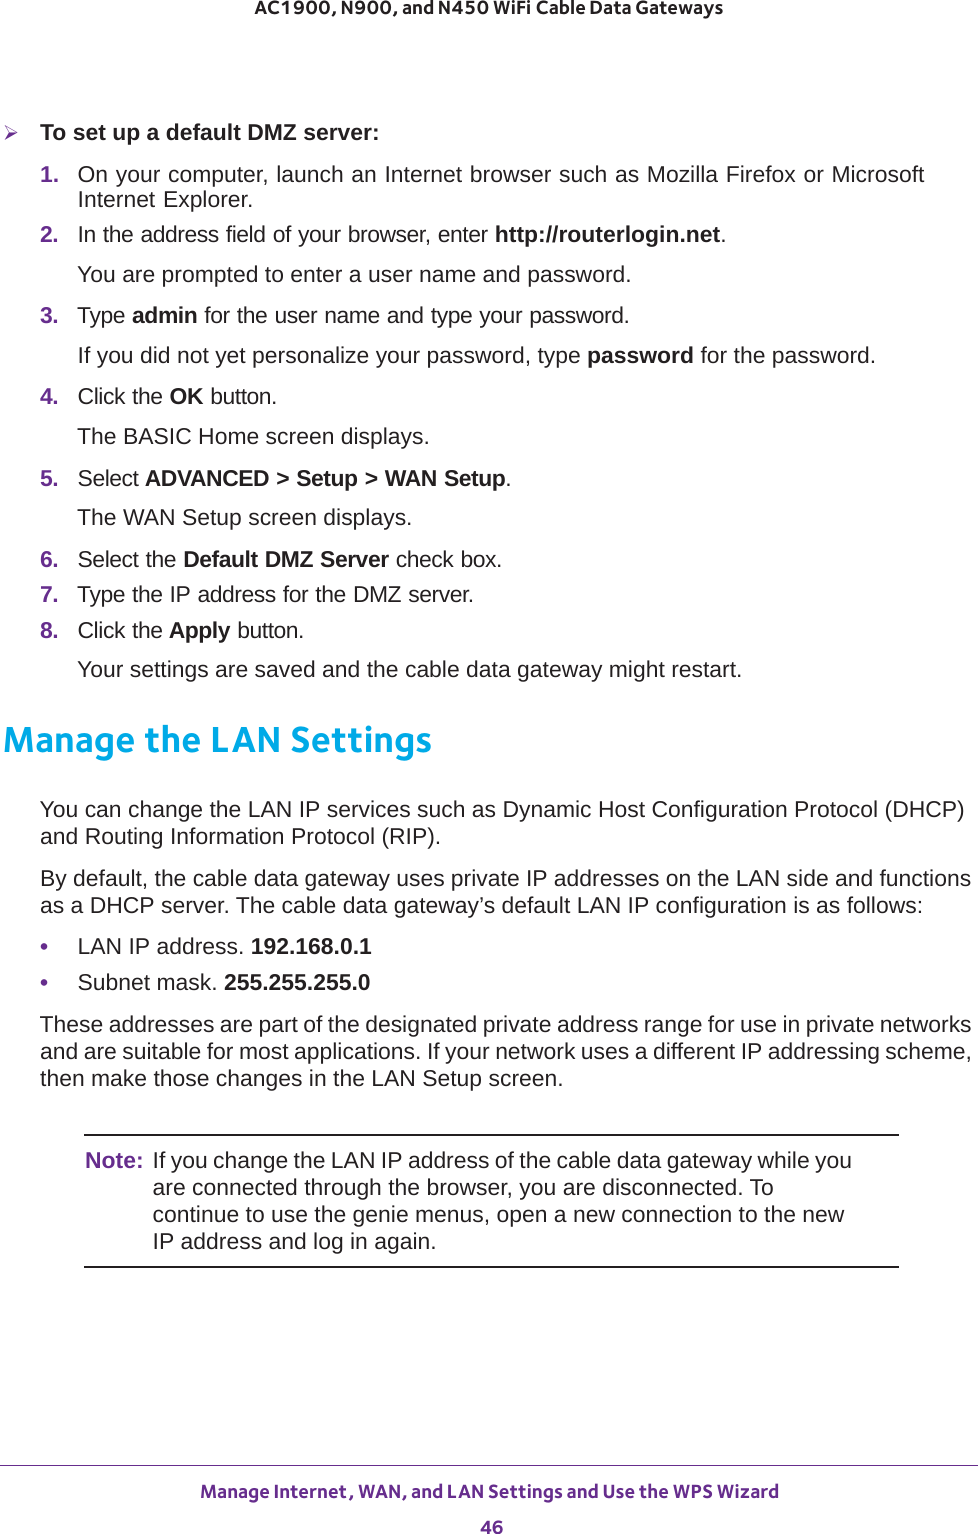 Manage Internet, WAN, and LAN Settings and Use the WPS Wizard 46AC1900, N900, and N450 WiFi Cable Data Gateways To set up a default DMZ server: 1.  On your computer, launch an Internet browser such as Mozilla Firefox or Microsoft Internet Explorer. 2.  In the address field of your browser, enter http://routerlogin.net.You are prompted to enter a user name and password.3.  Type admin for the user name and type your password.If you did not yet personalize your password, type password for the password.4.  Click the OK button. The BASIC Home screen displays.5.  Select ADVANCED &gt; Setup &gt; WAN Setup.The WAN Setup screen displays.6.  Select the Default DMZ Server check box.7.  Type the IP address for the DMZ server.8.  Click the Apply button.Your settings are saved and the cable data gateway might restart.Manage the LAN SettingsYou can change the LAN IP services such as Dynamic Host Configuration Protocol (DHCP) and Routing Information Protocol (RIP).By default, the cable data gateway uses private IP addresses on the LAN side and functions as a DHCP server. The cable data gateway’s default LAN IP configuration is as follows:•LAN IP address. 192.168.0.1•Subnet mask. 255.255.255.0These addresses are part of the designated private address range for use in private networks and are suitable for most applications. If your network uses a different IP addressing scheme, then make those changes in the LAN Setup screen.Note: If you change the LAN IP address of the cable data gateway while you are connected through the browser, you are disconnected. To continue to use the genie menus, open a new connection to the new IP address and log in again.